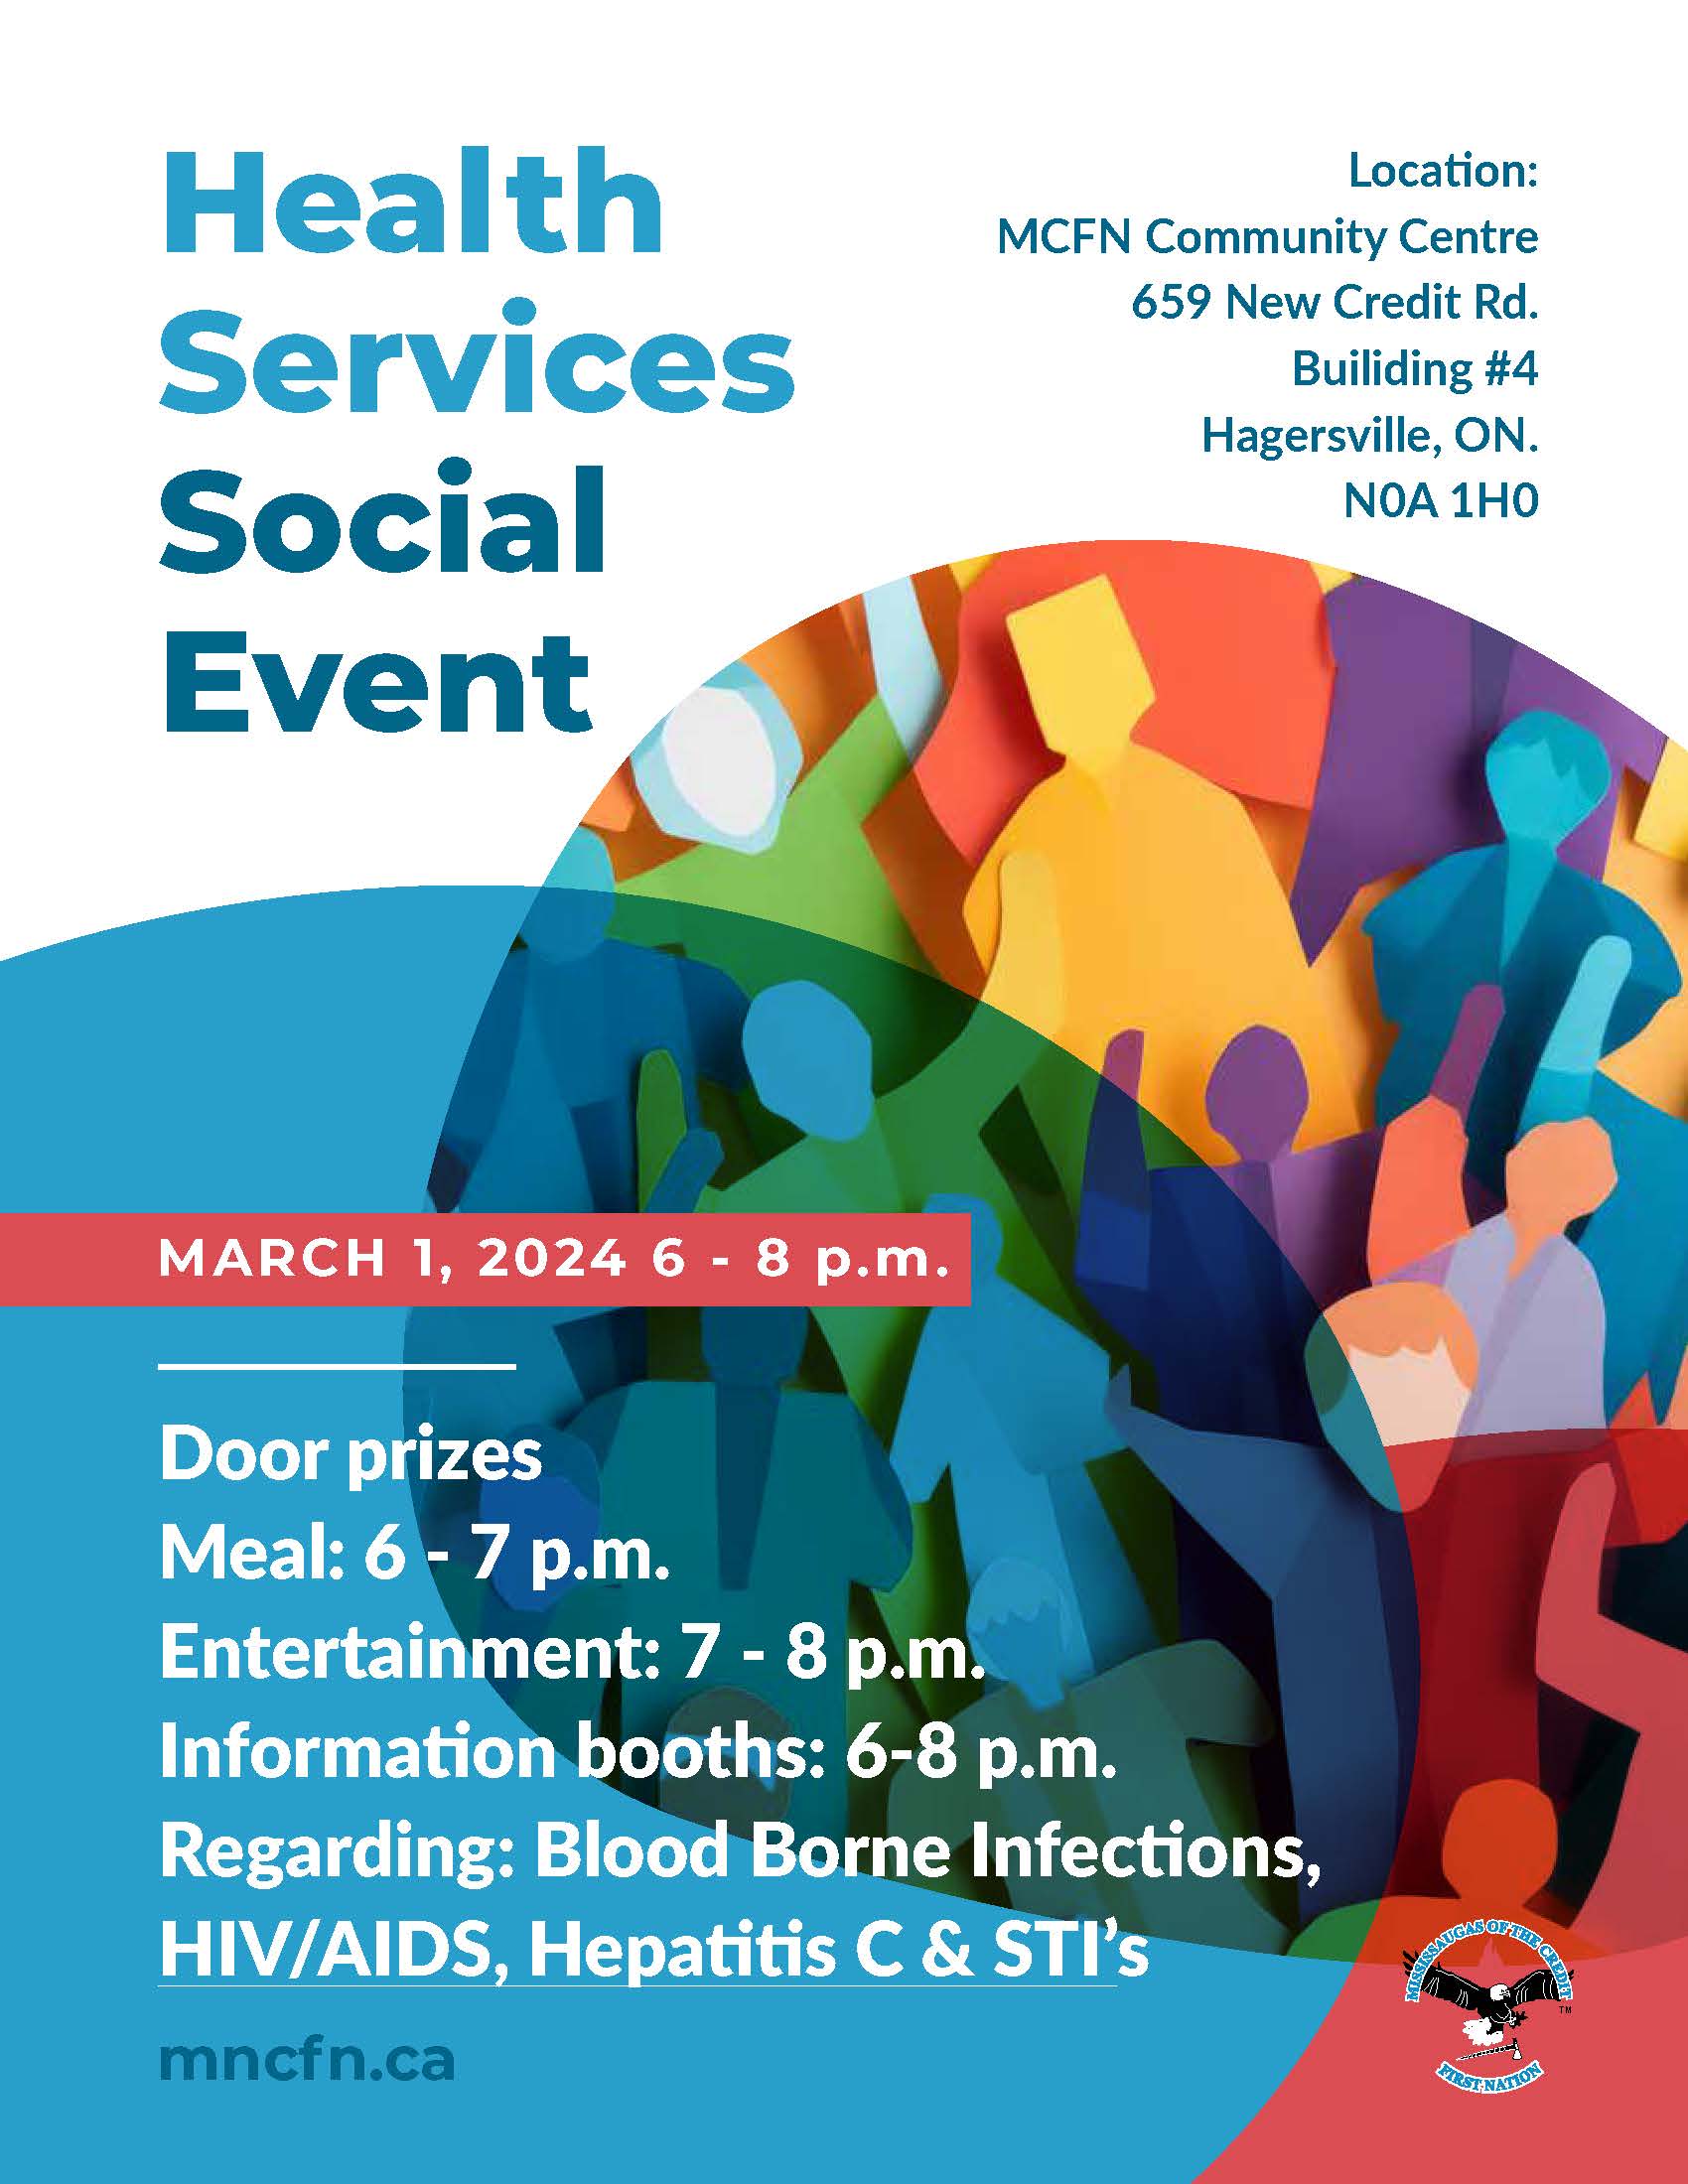 Health Services Social Event